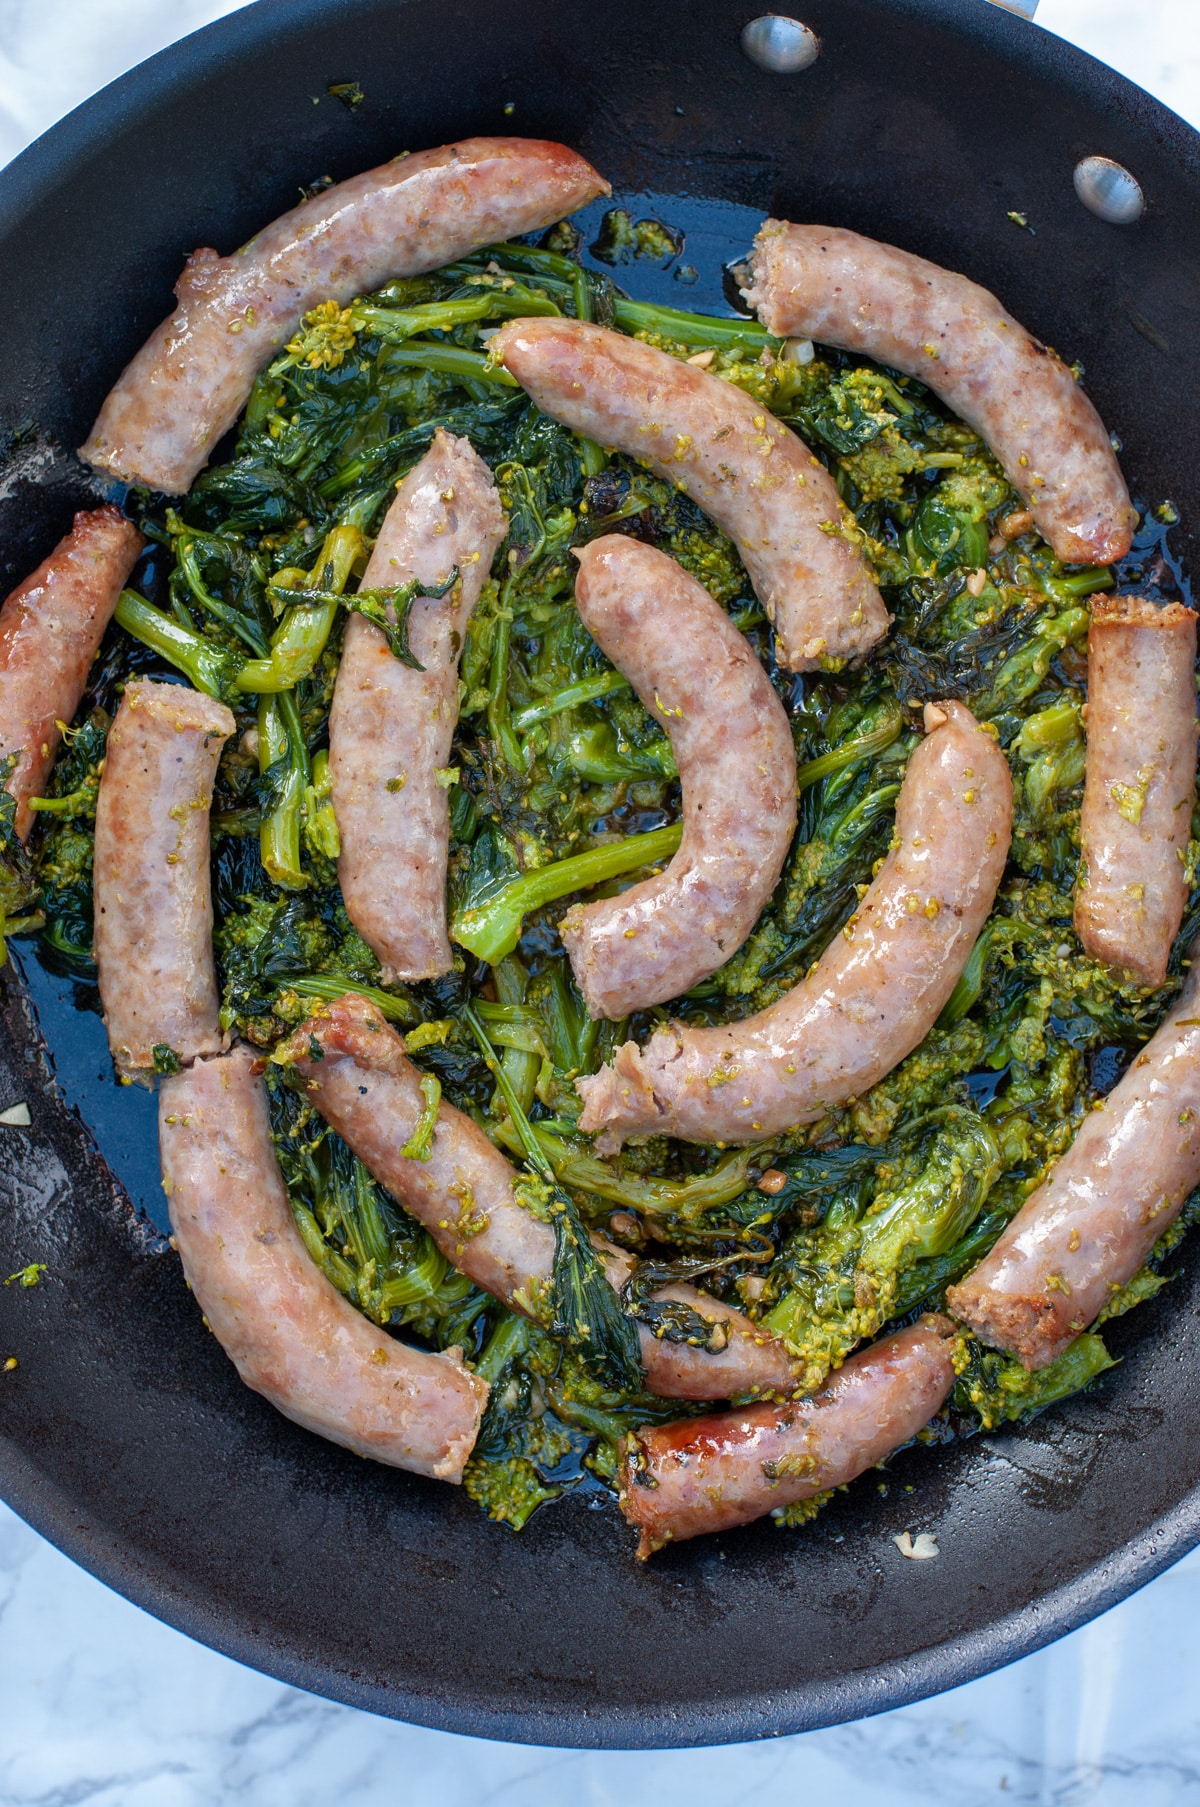 Sausage and friarielli in a pan